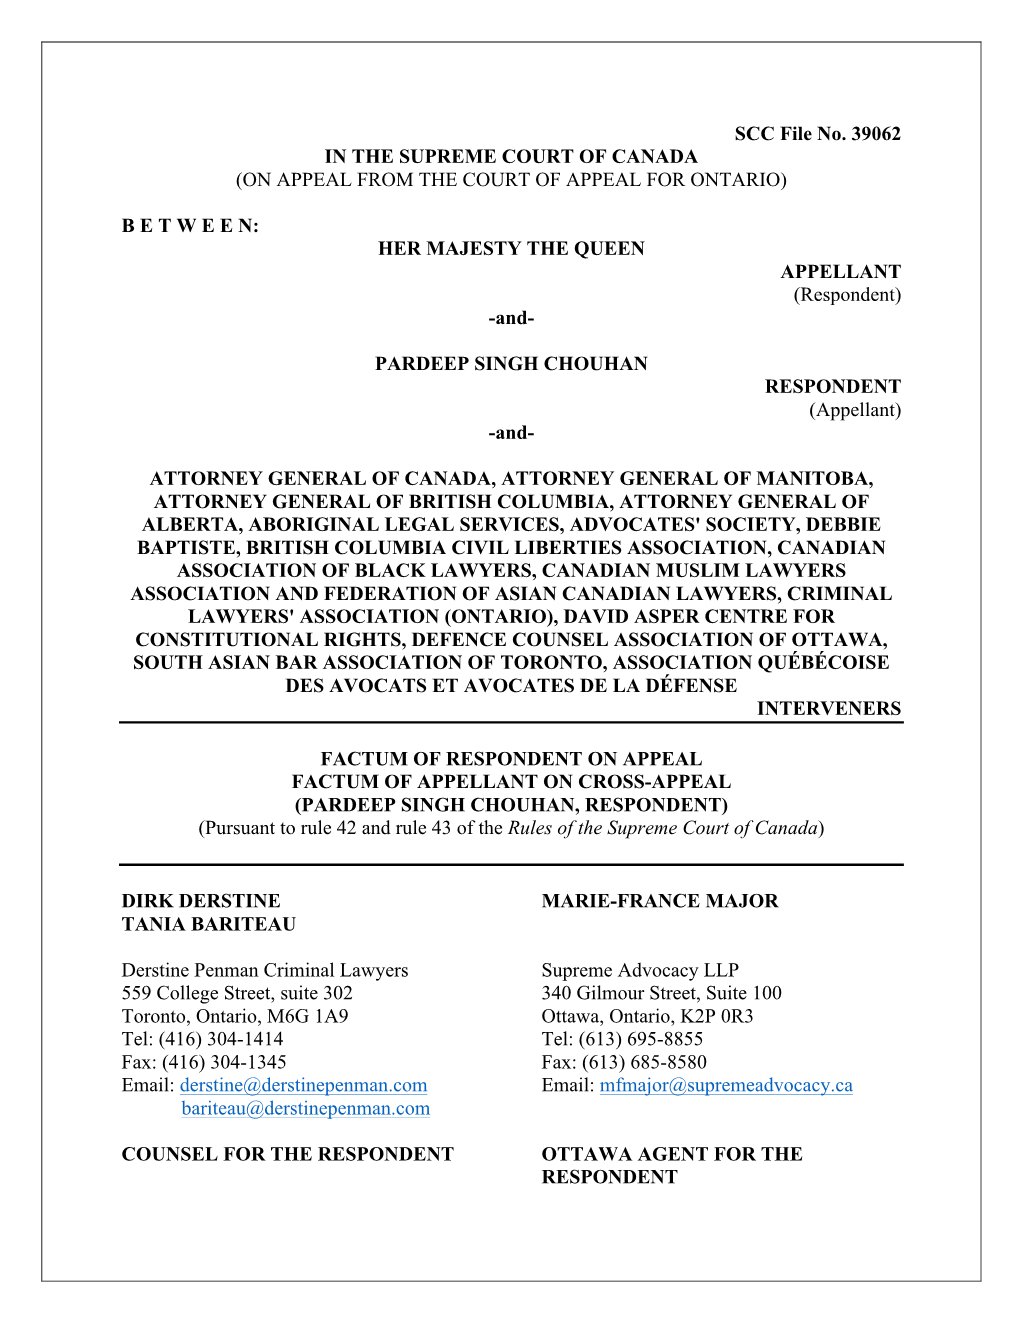 SCC File No. 39062 in the SUPREME COURT of CANADA (ON APPEAL from the COURT of APPEAL for ONTARIO) B E T W E E N: HER MAJESTY TH